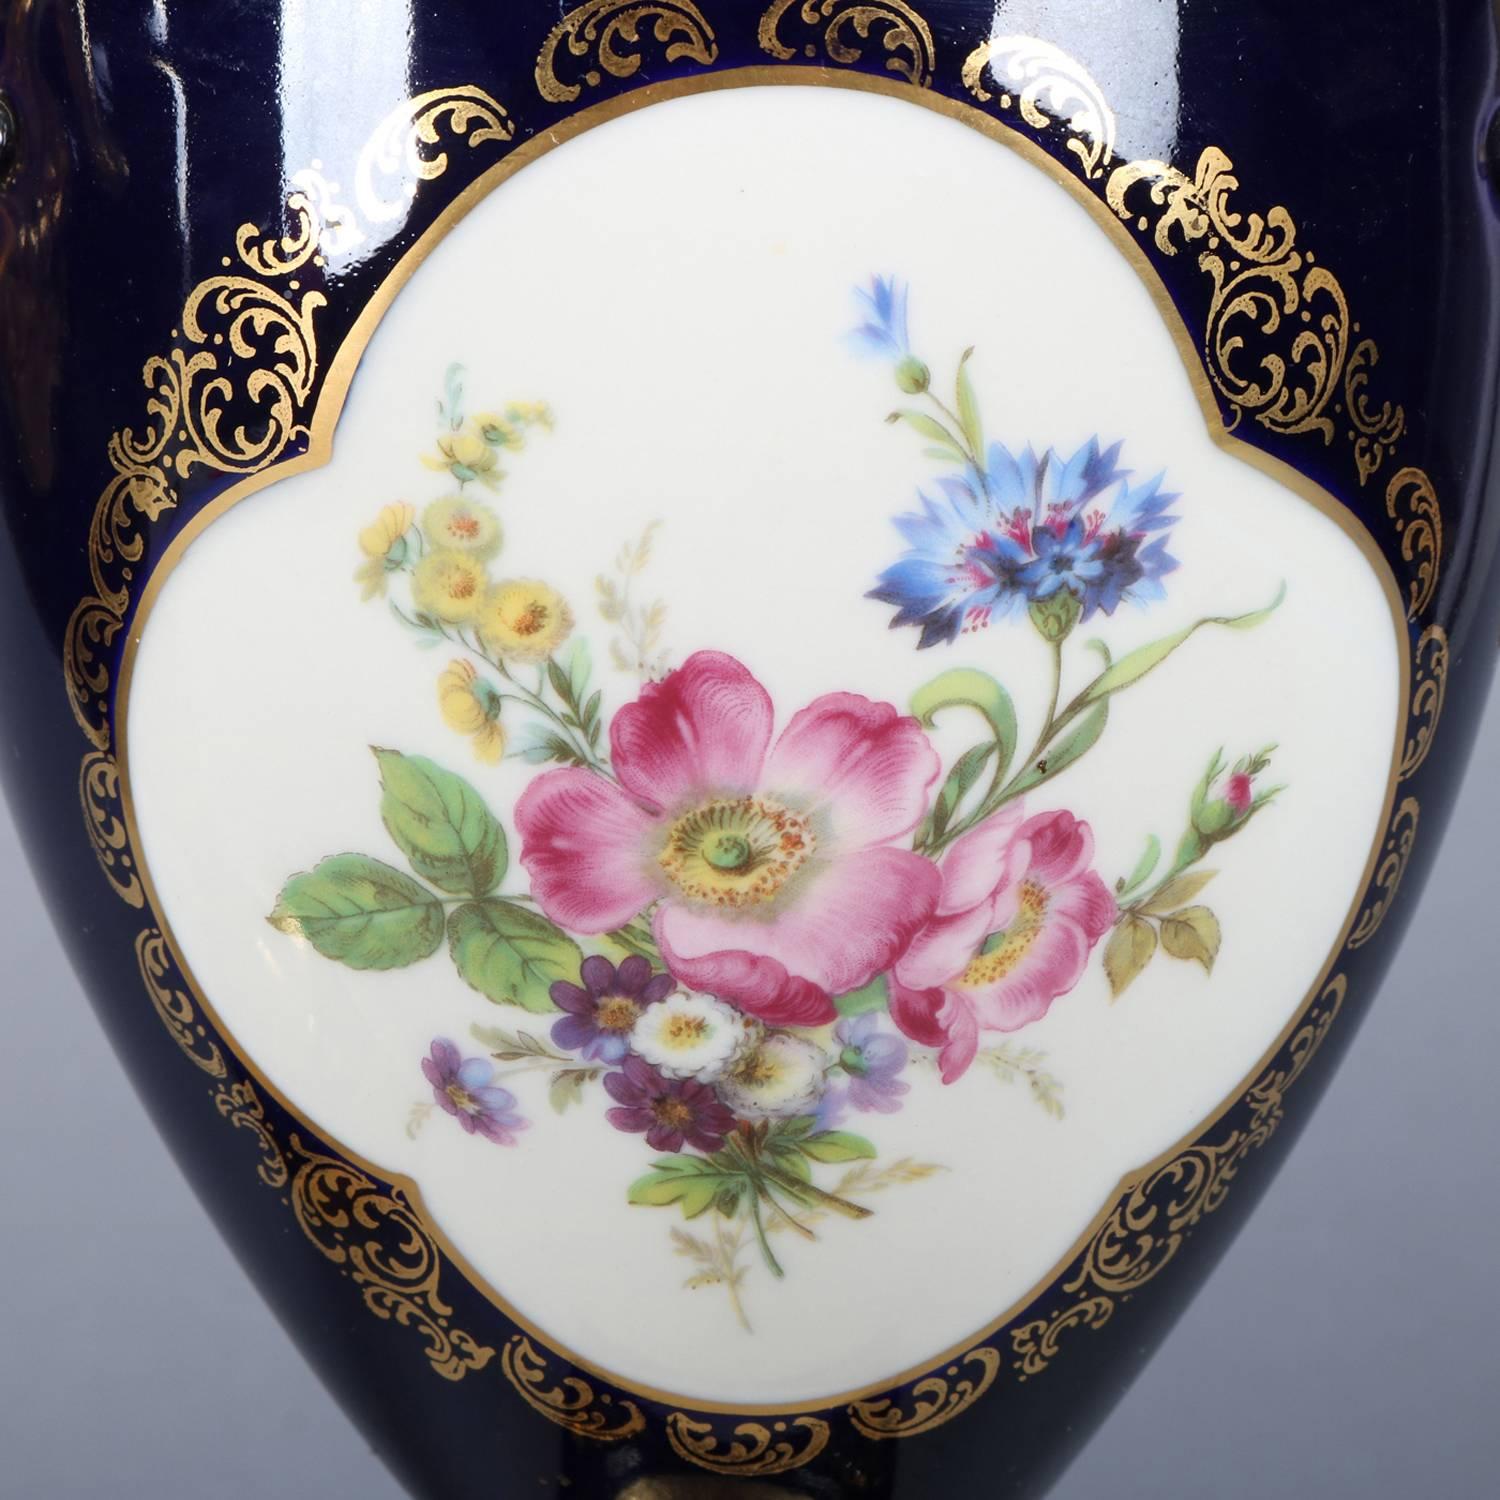 French Western Germany Meissen School Hand-Painted Cobalt and Gilt Porcelain Urns